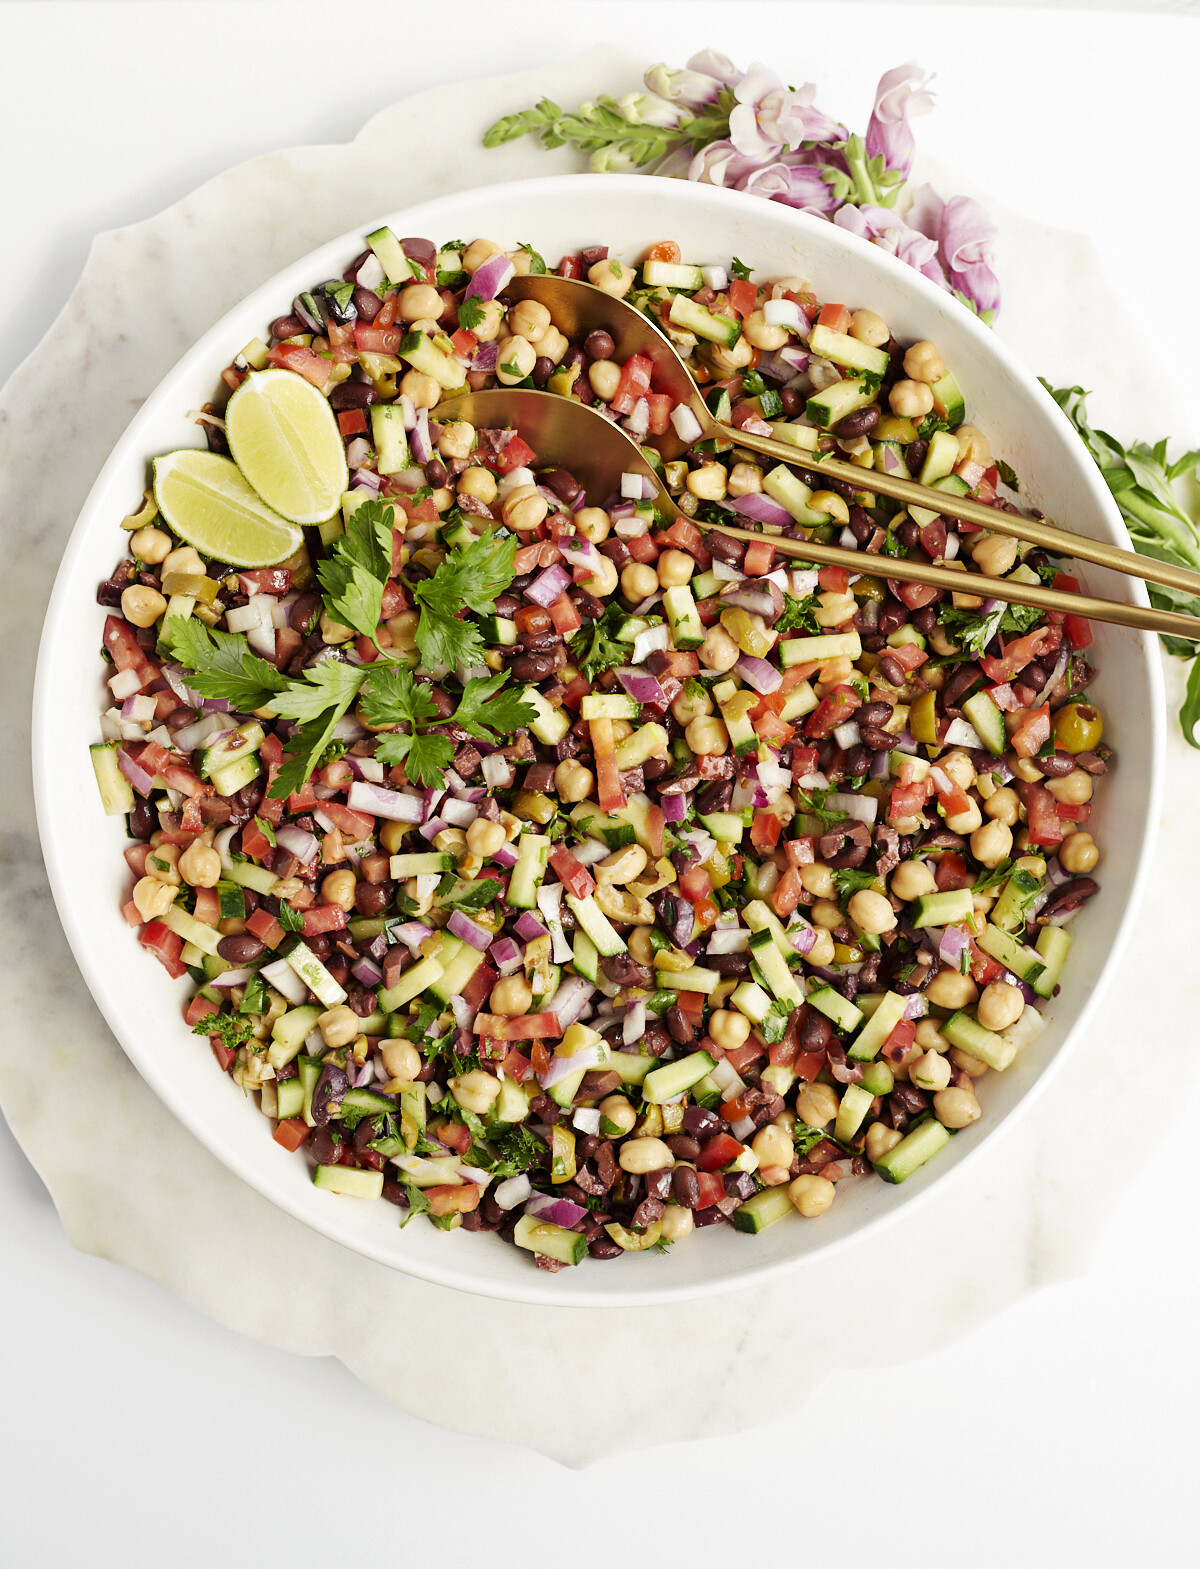 Image of a Mediterranean chickpea salad recipe in a large white bowl